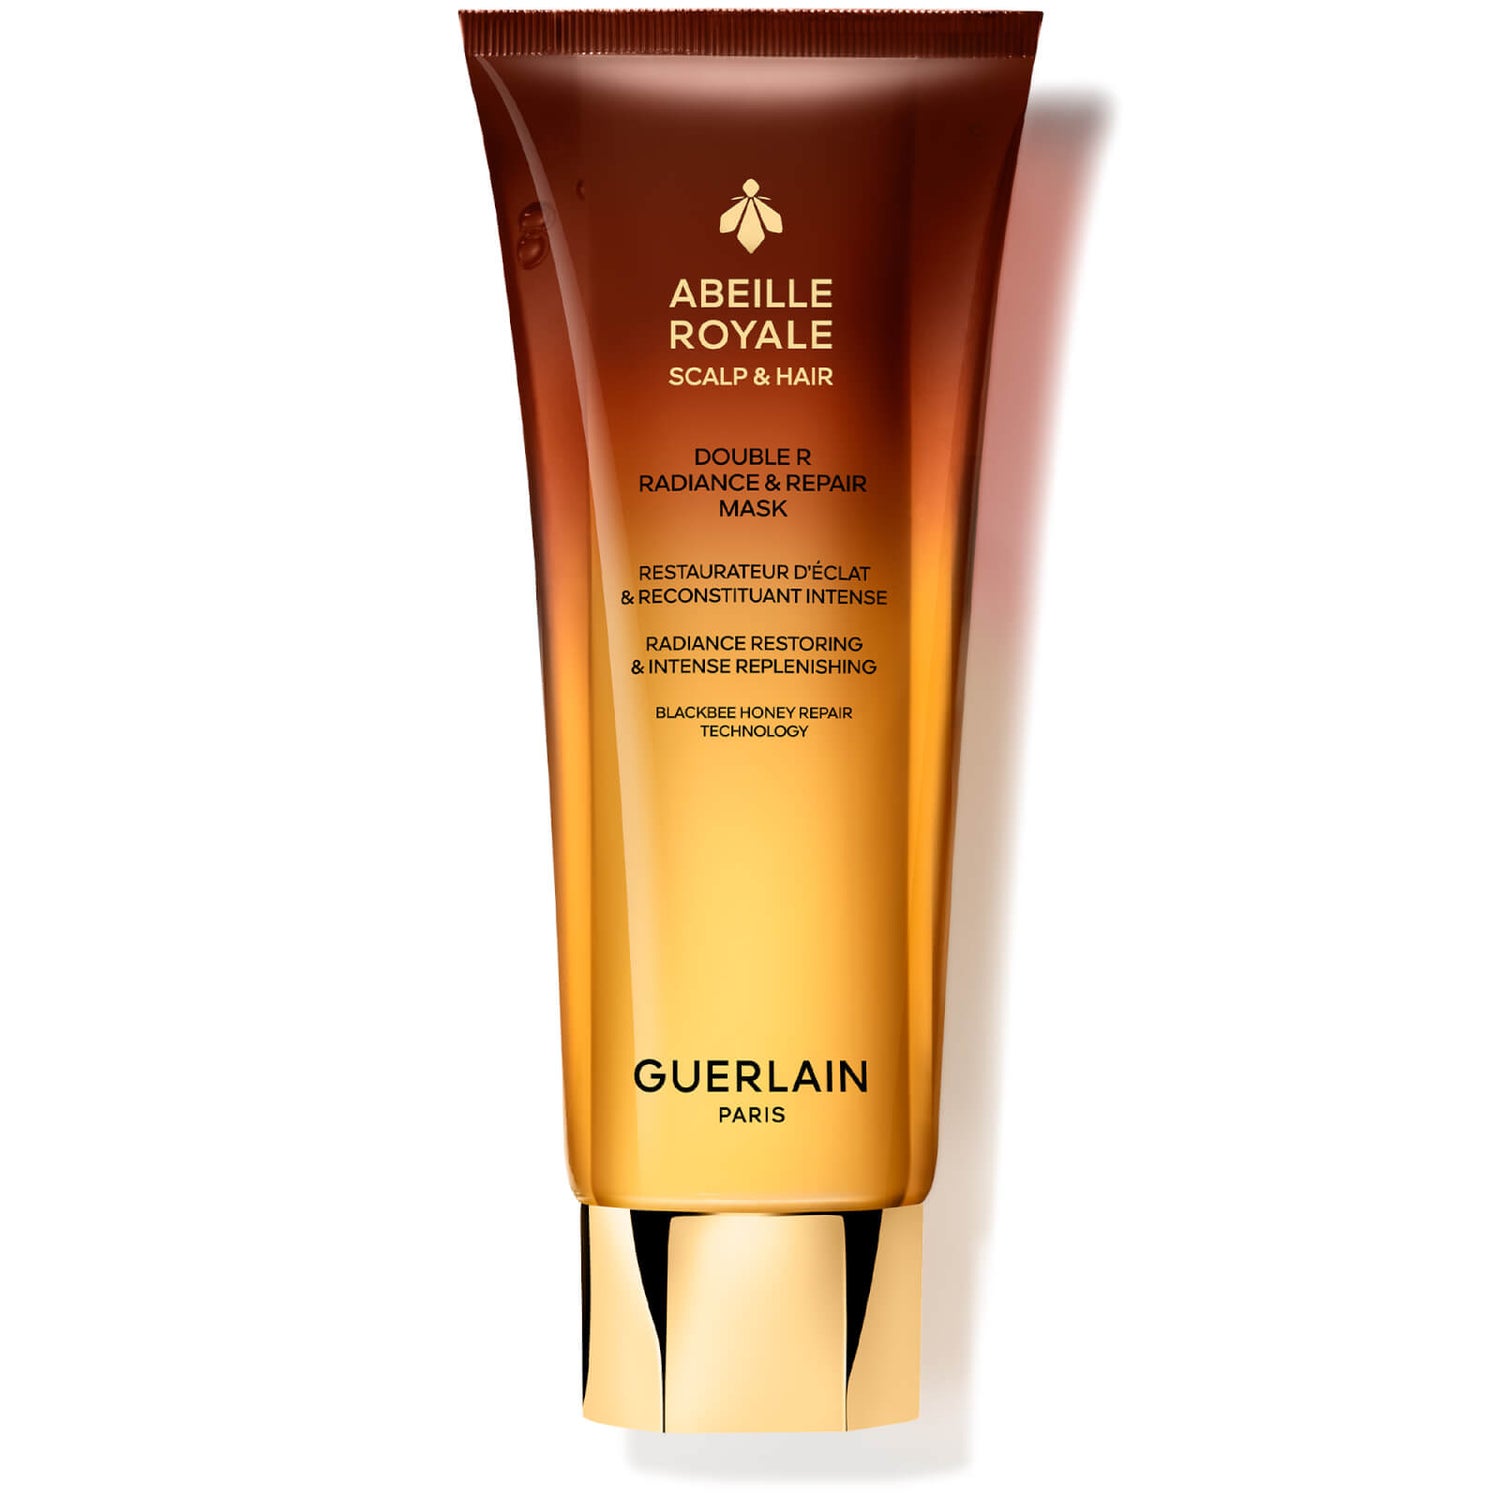 GUERLAIN Exclusive Abeille Royale Double R Radiance and Repair Mask 200ml